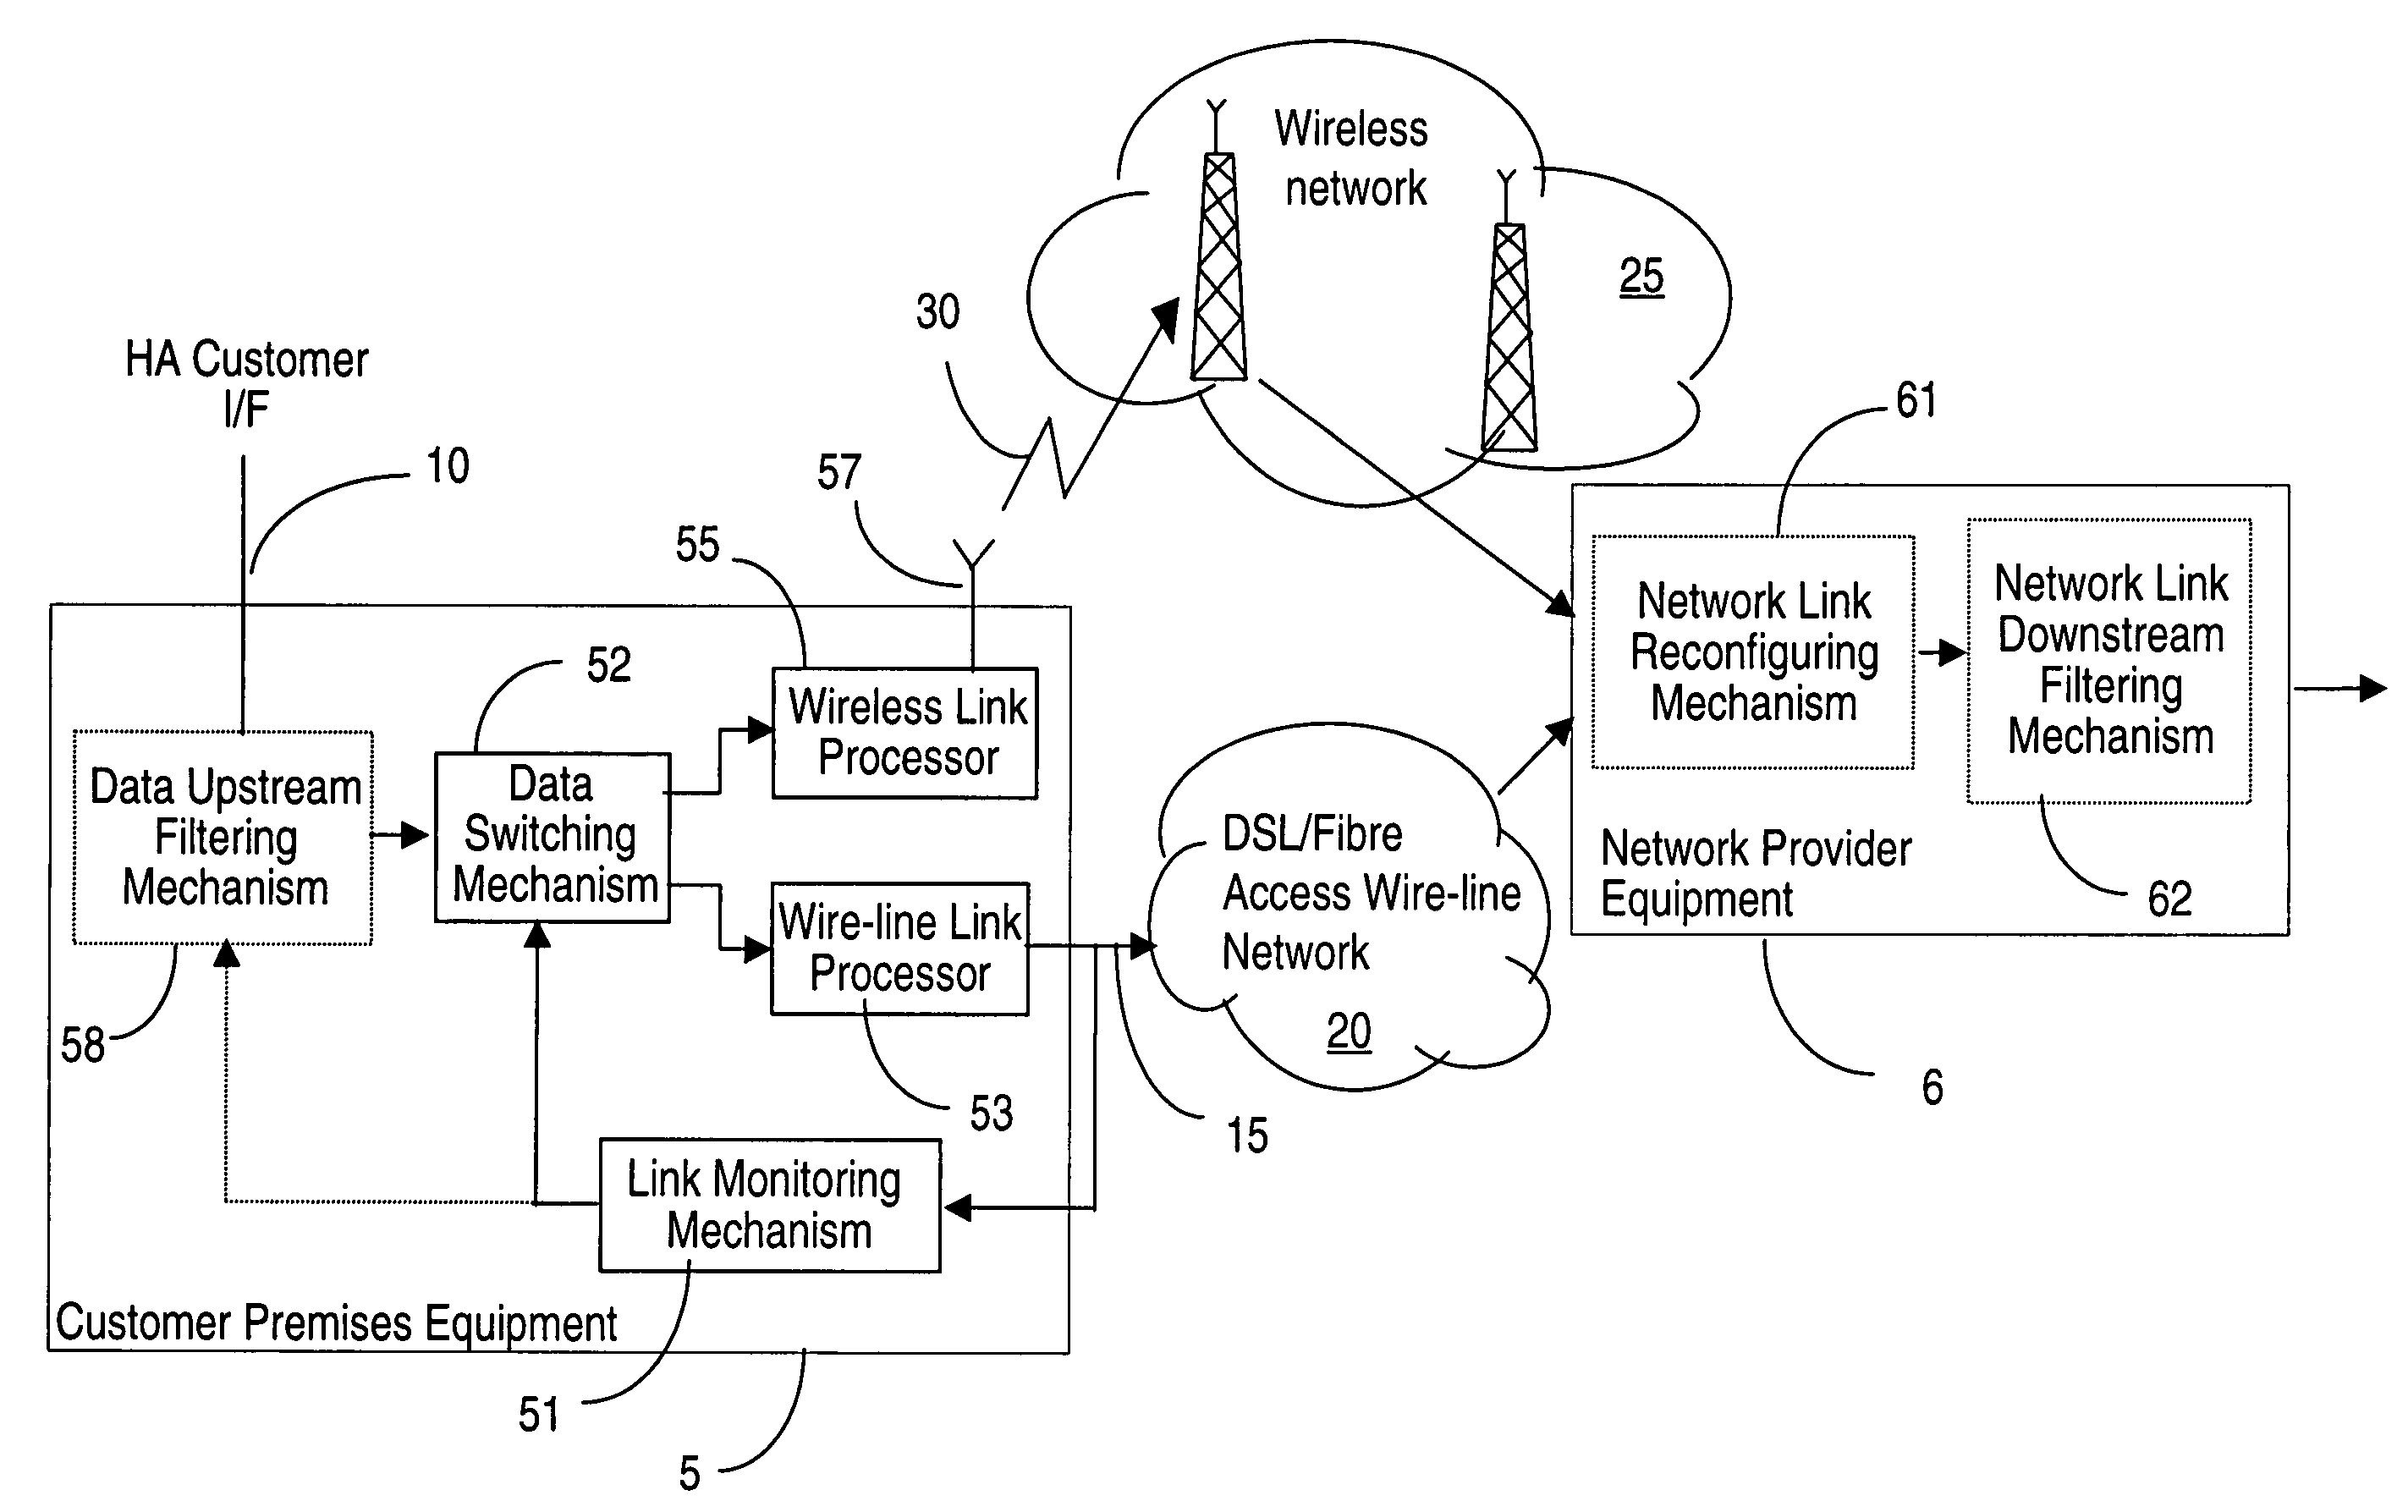 High availability broadband connections through switching from wireline to diverse wireless network